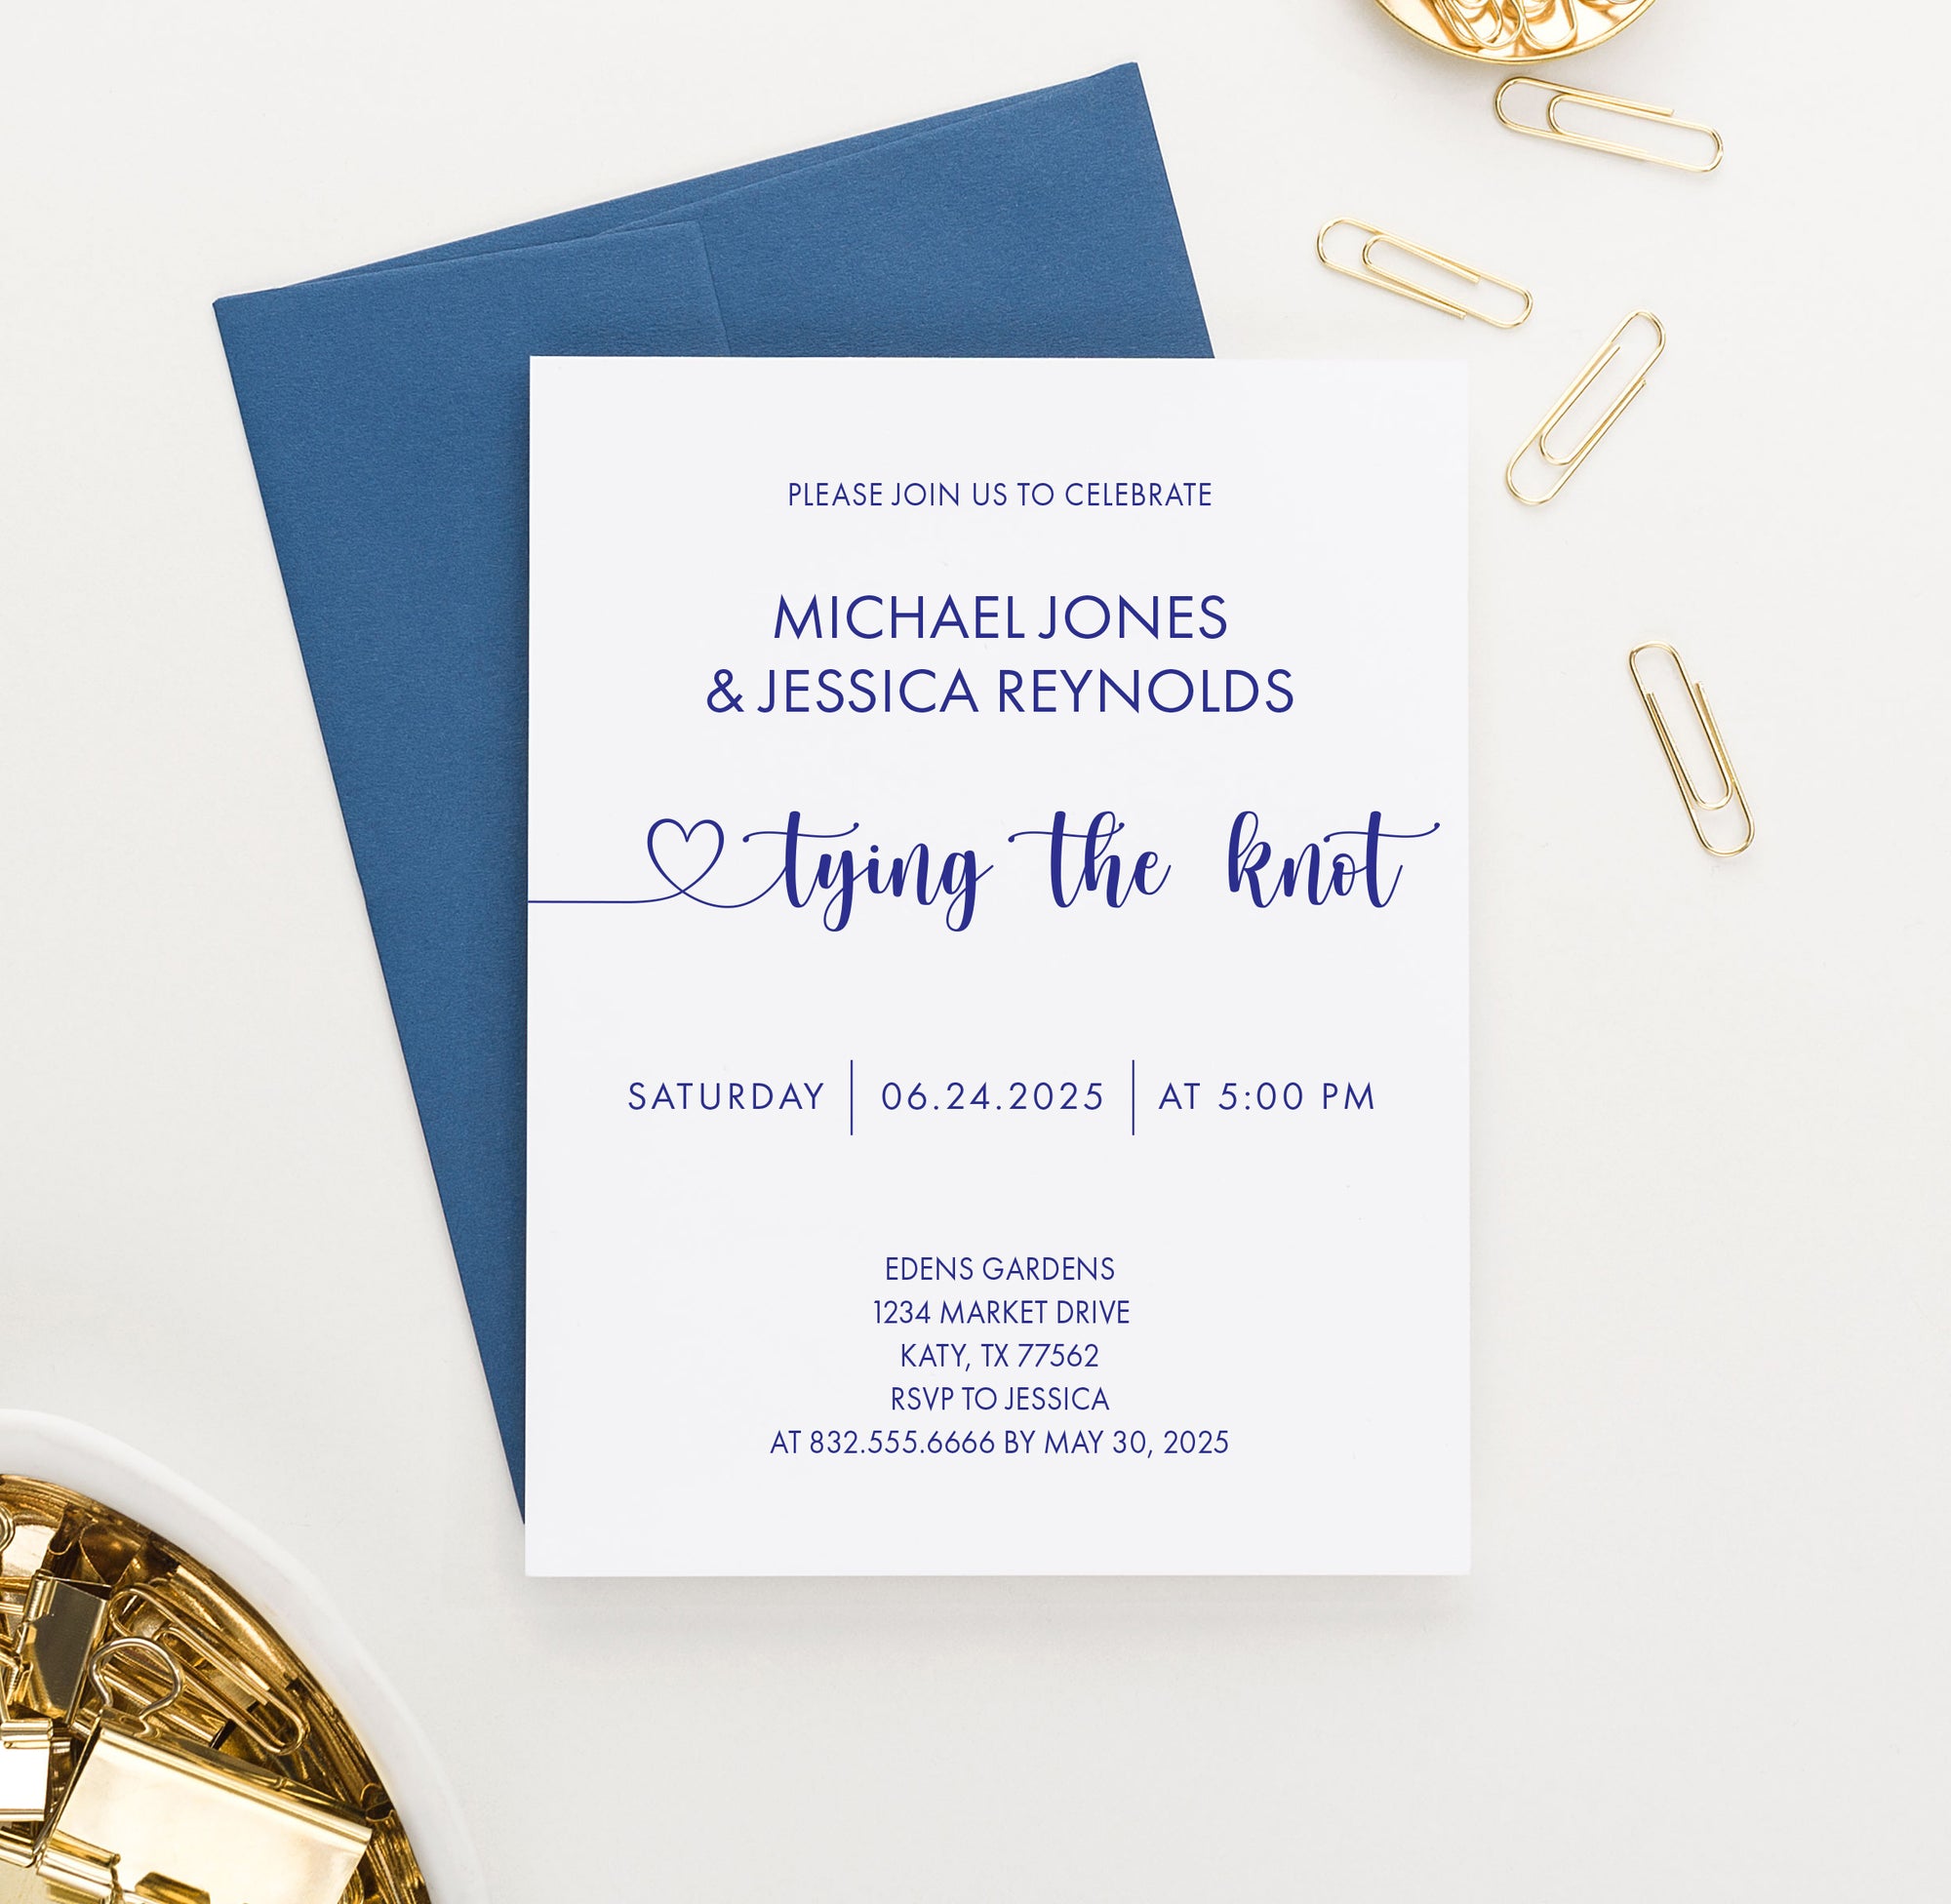 WI057 Personalized Tying The Knot Wedding Invitation invite marriage simple classic classy modern calligraphy